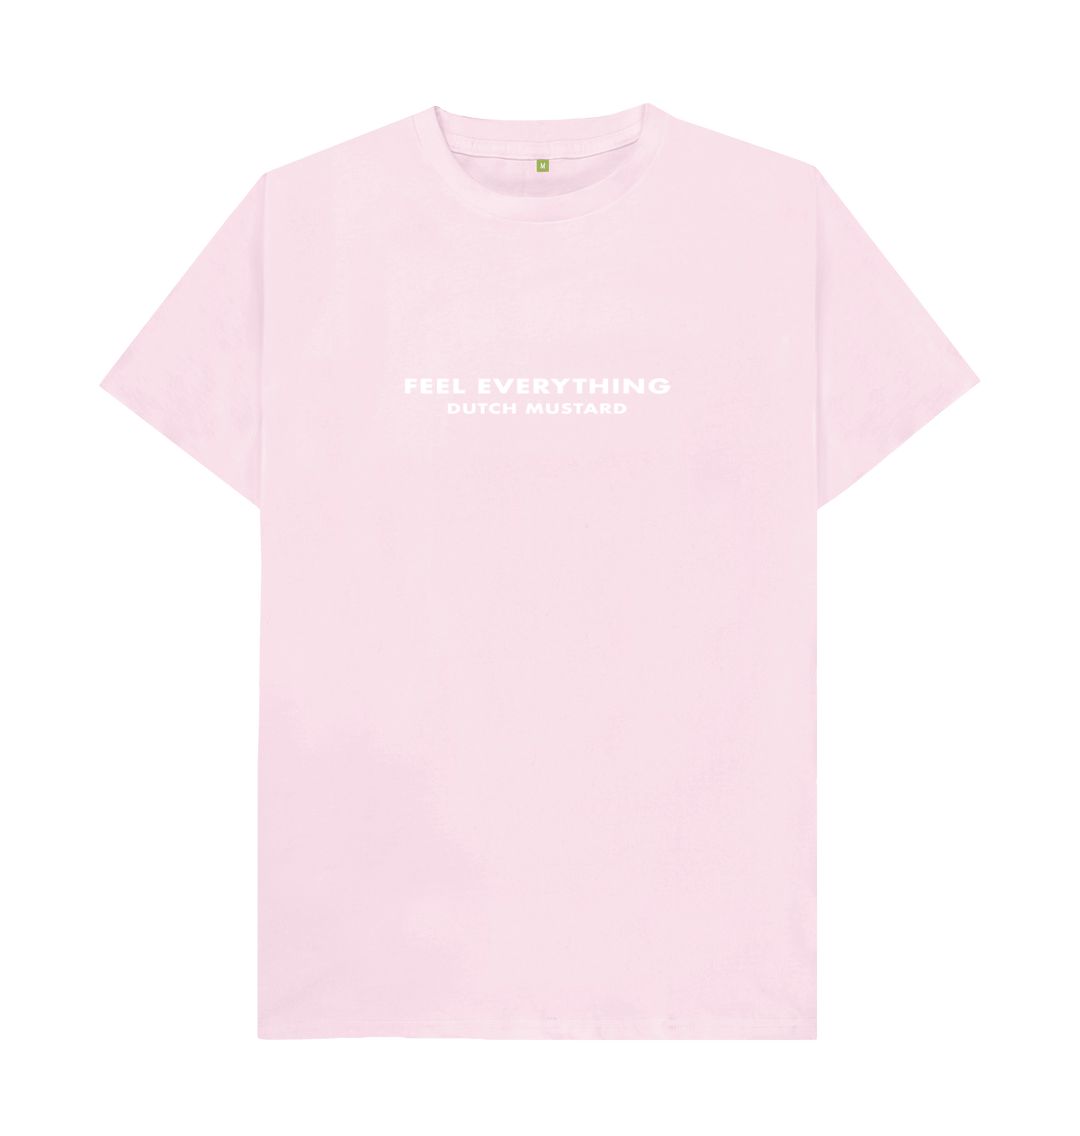 Pink Feel Everything Unisex Tee - White Writing on Navy, Pink or Black